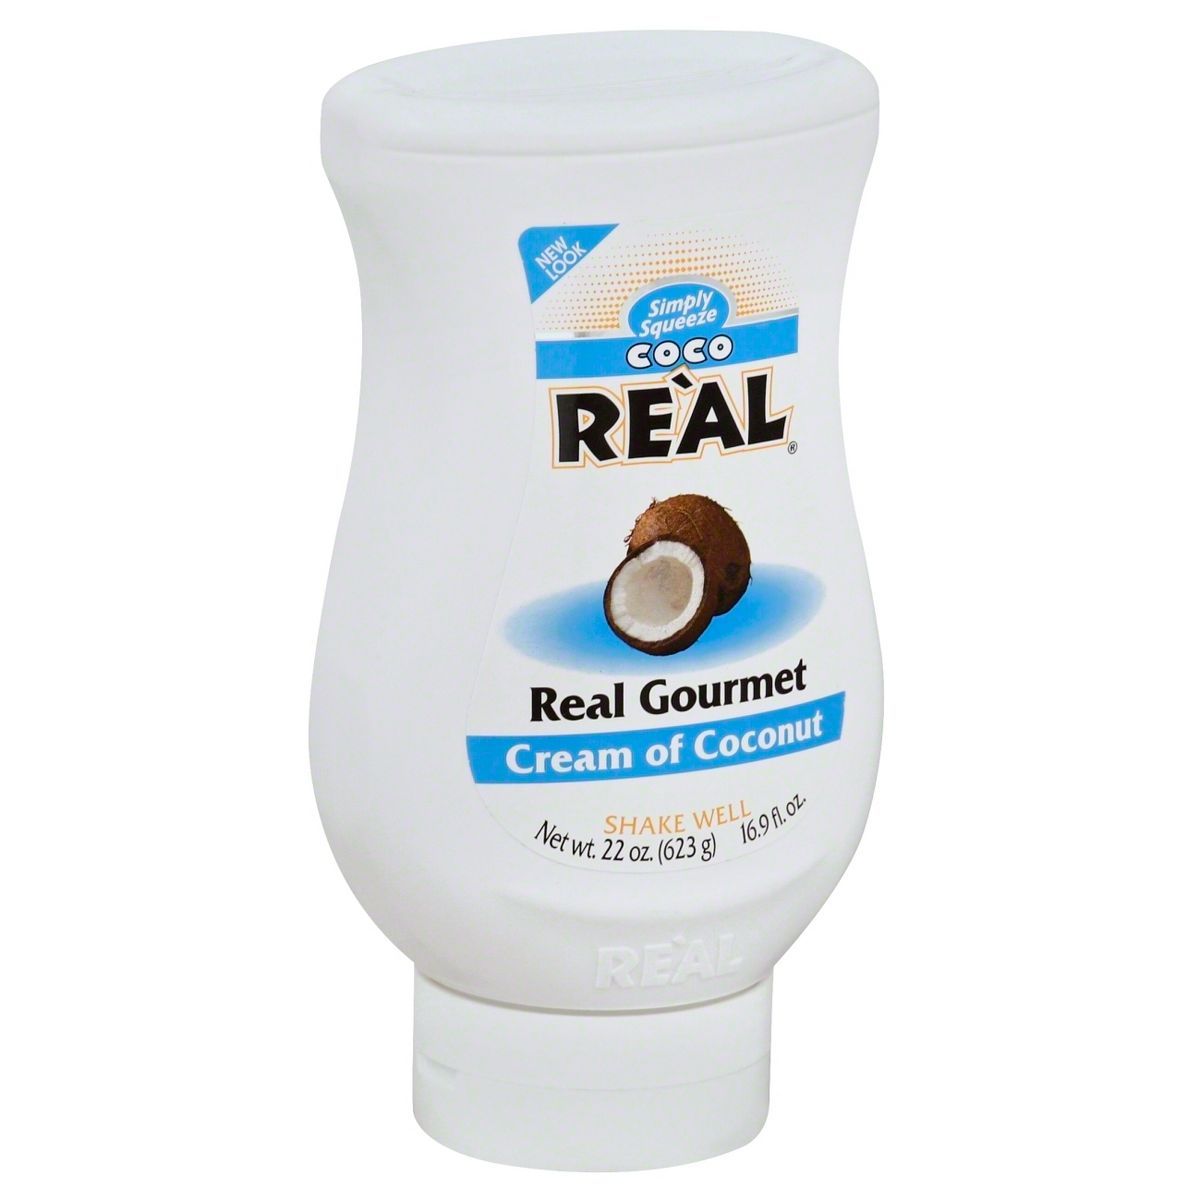 Coco Real Cream of Coconut Drink Mix - 16.9 fl oz Bottle | Target